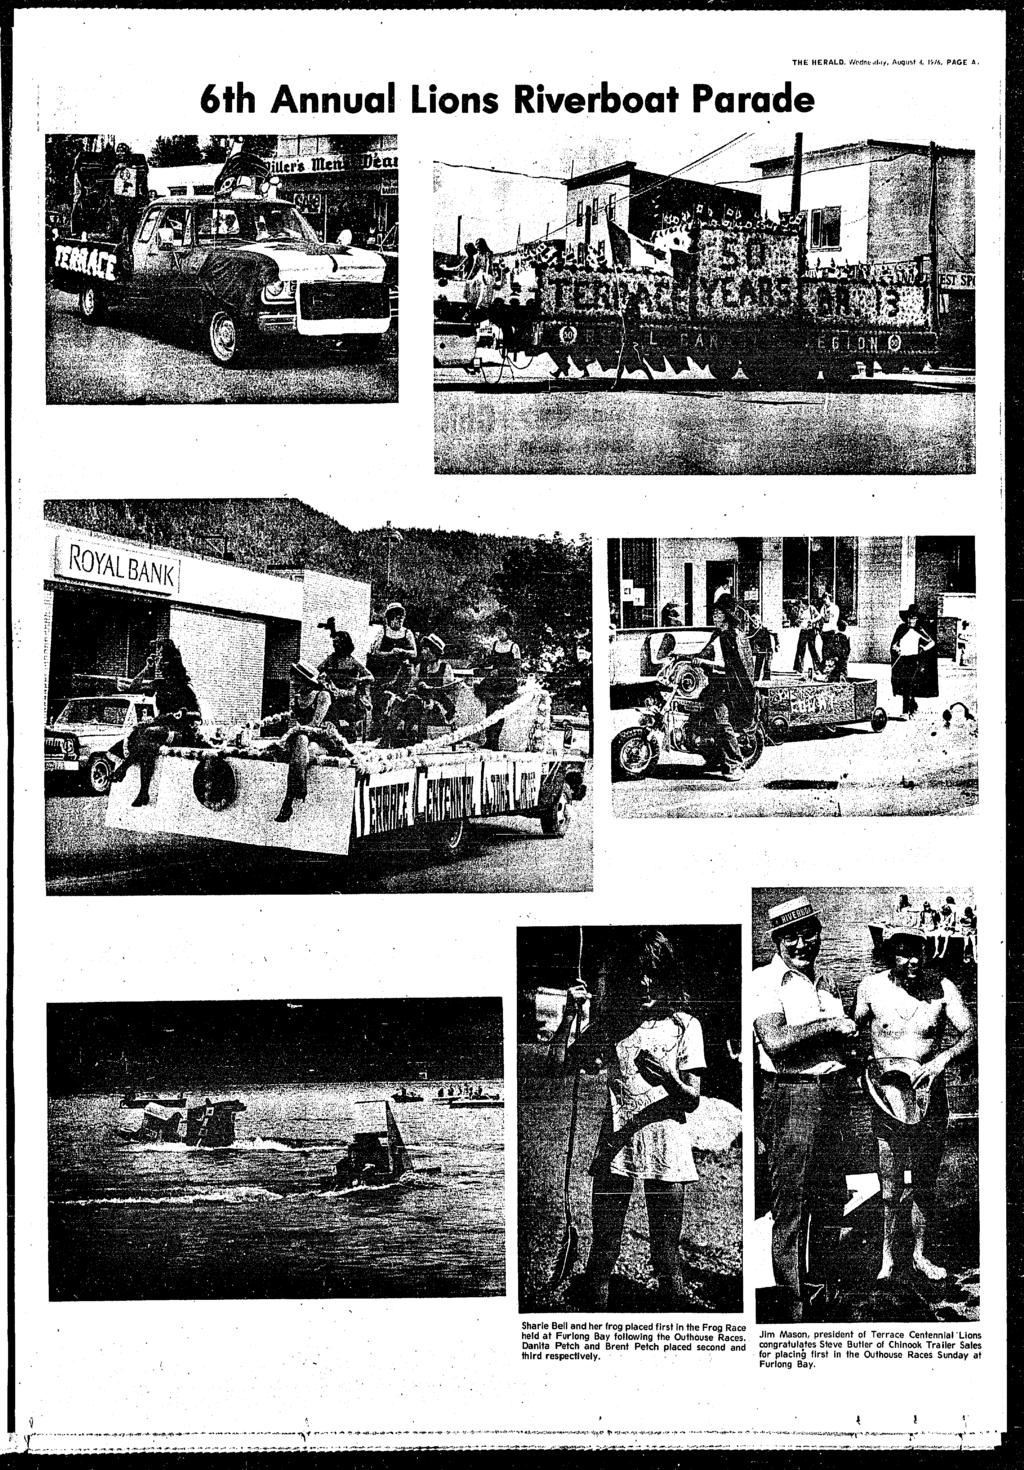 6th Annual Lons Rverboat Parade THE HERALD. WodnL.,d,Jf. Auqu~t 4, 1916. PAGE A, Sharle Bell and her frog placed frst n the Frog Race held at Furlong Bay followng the Outhouse Races.